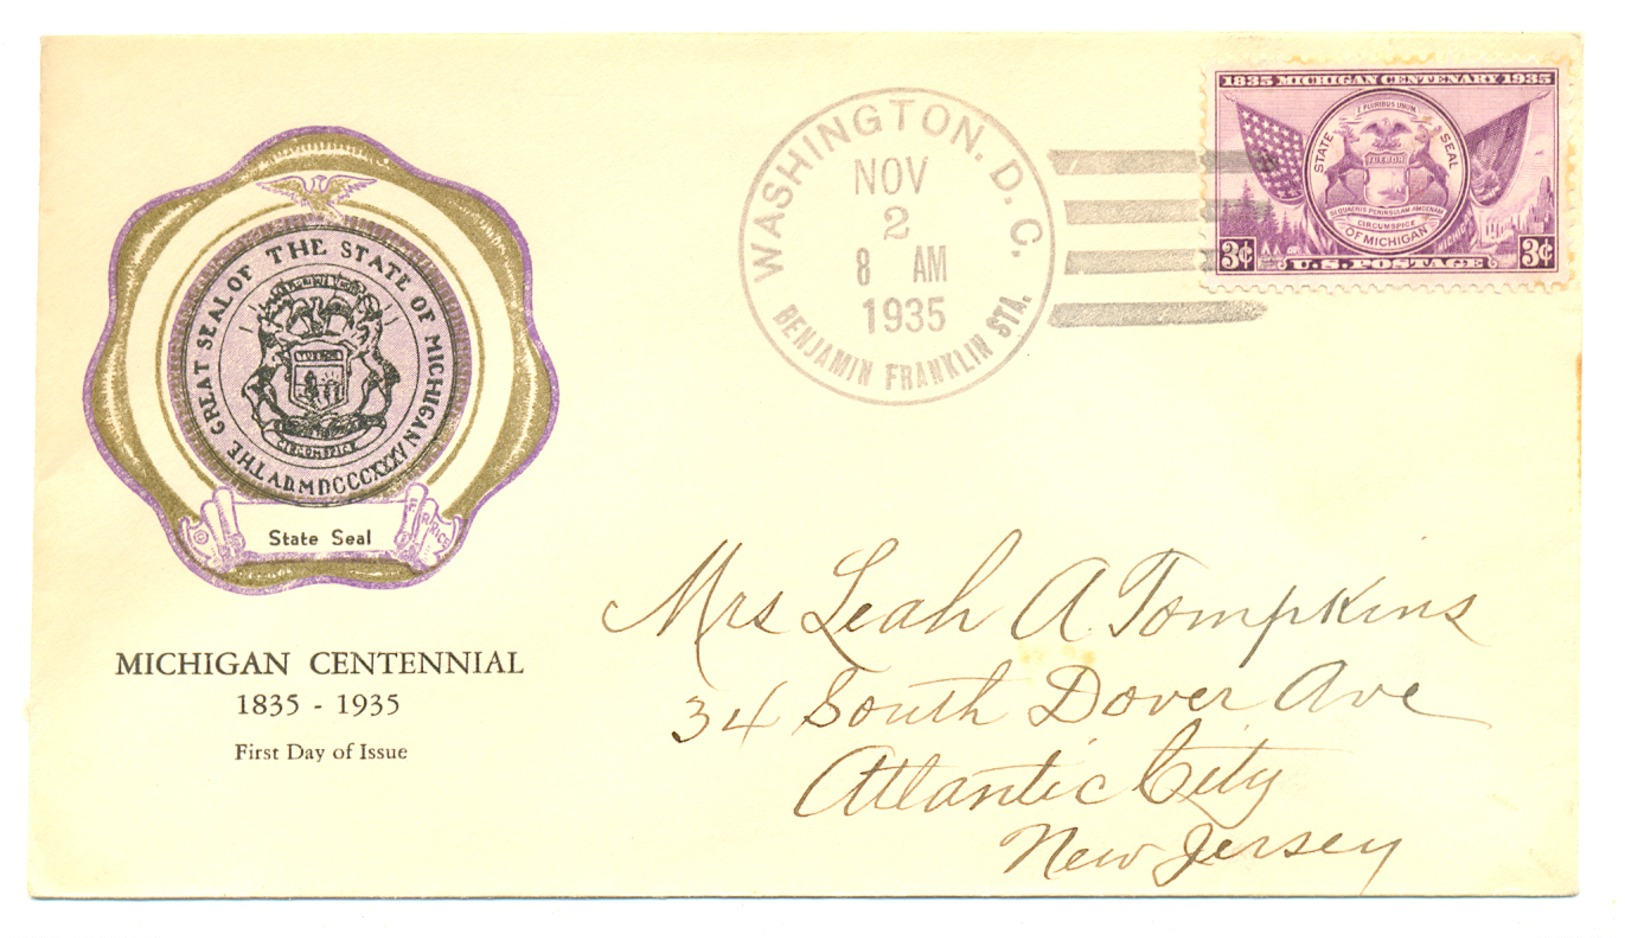 USA DC WASHINGTON TO NJ 1935 FIRST DAY COVER 43117 SC 775 MICHIGAN STATE SEAL - Marcofilie